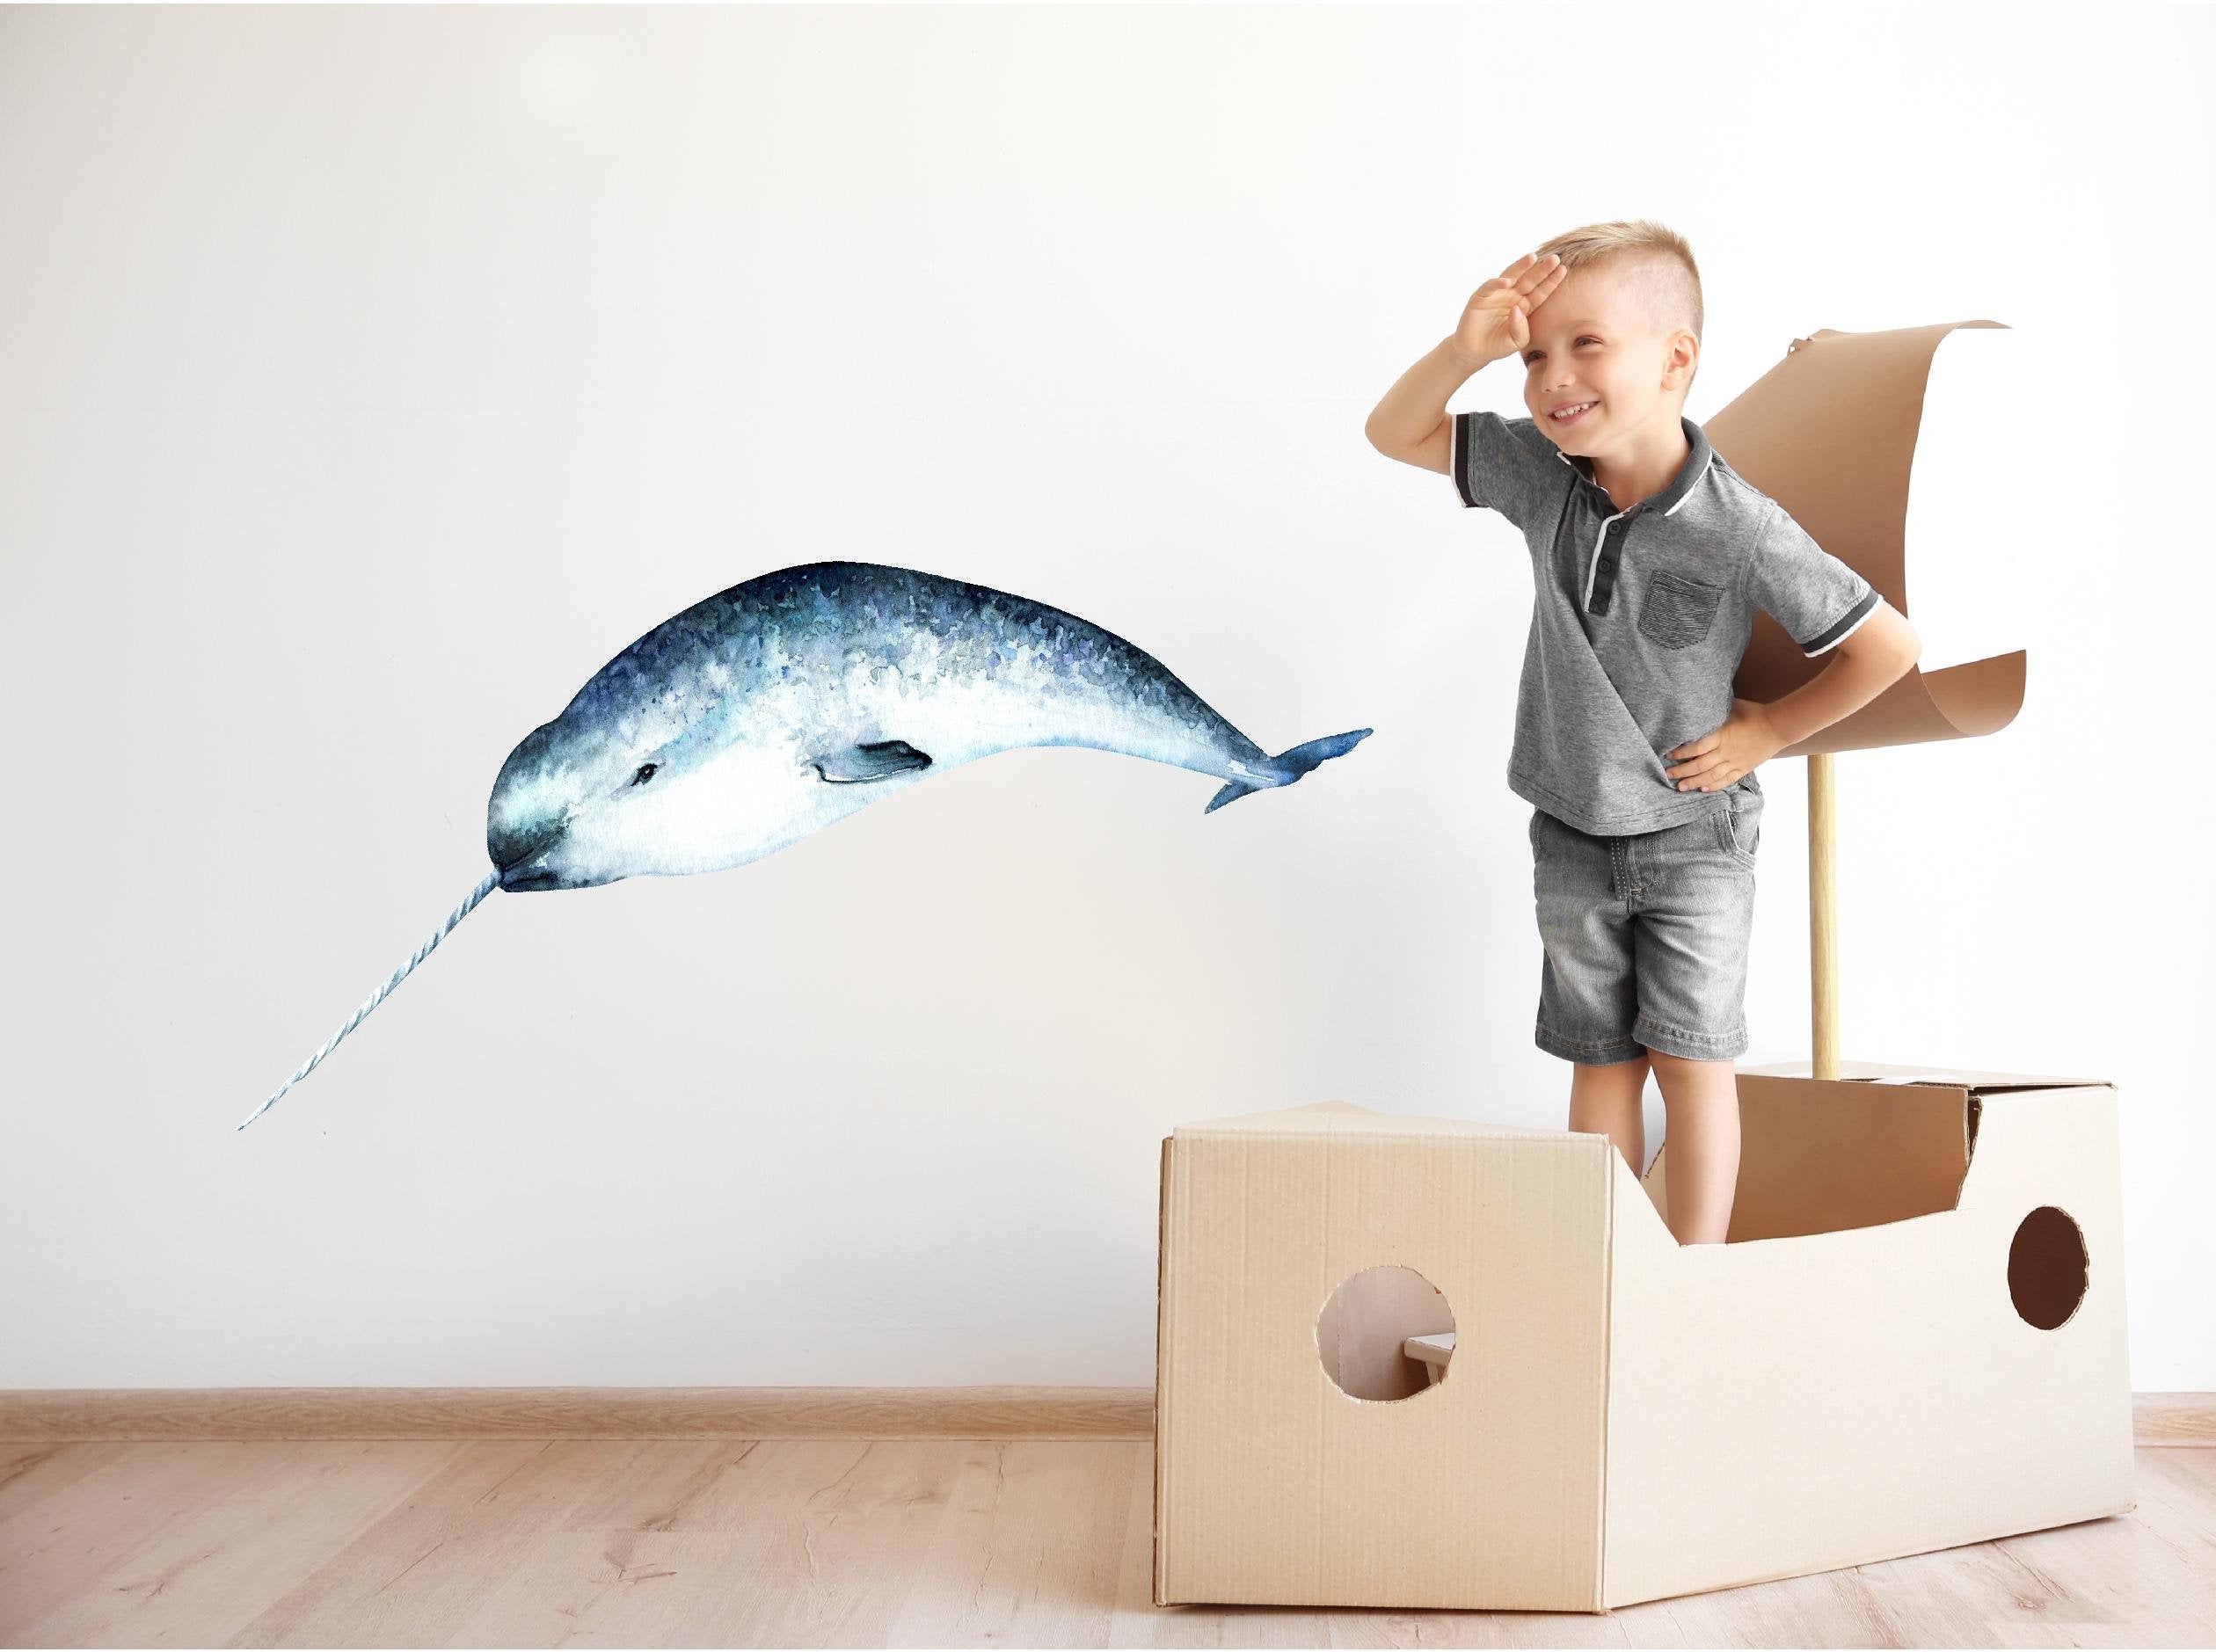 Watercolor Narwhal Wall Decal Blue Sea Unicorn Removable Fabric Vinyl Wall Sticker